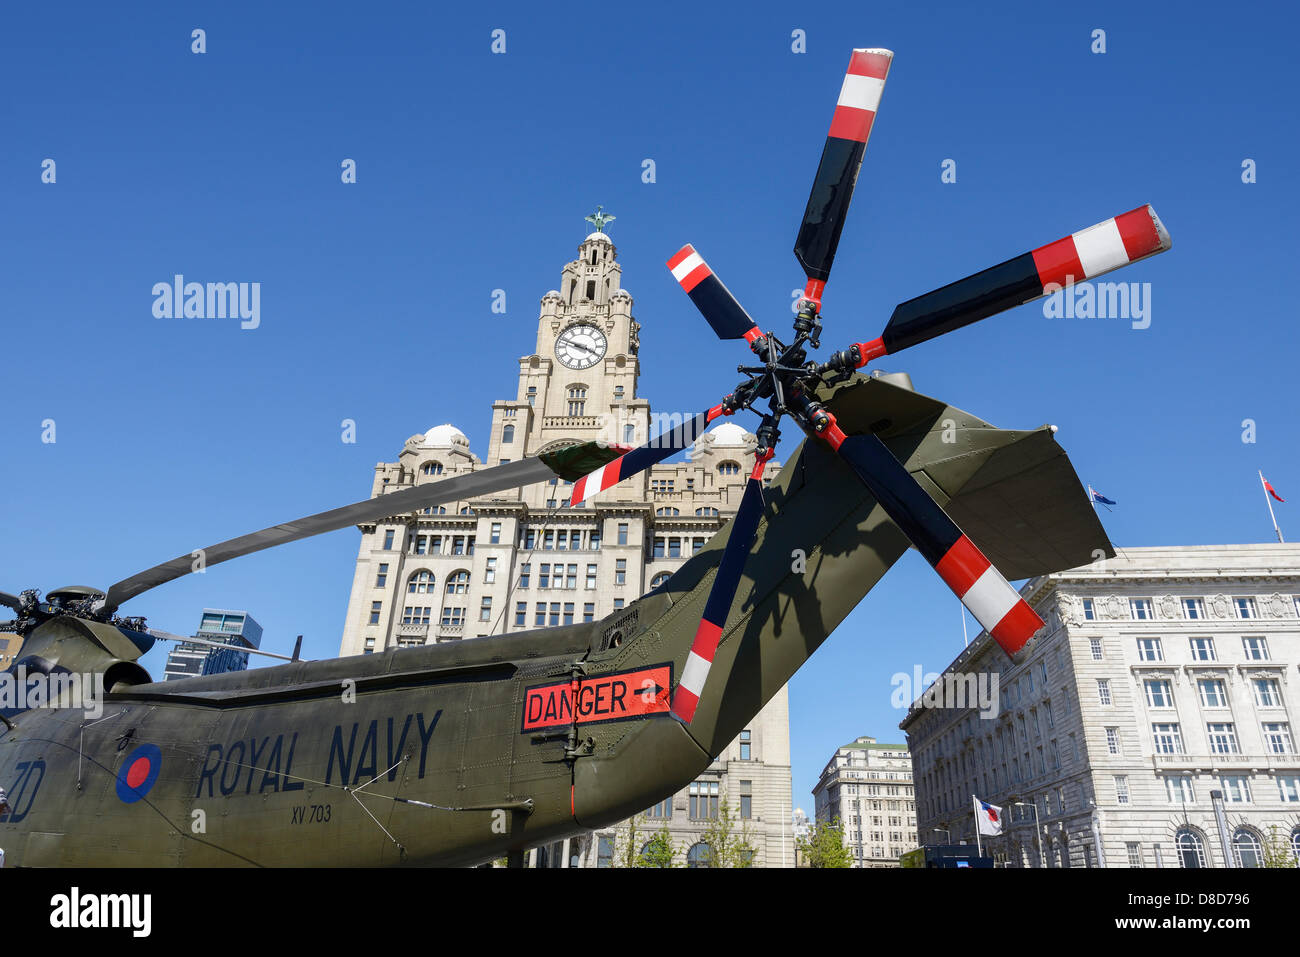 Liverpool, UK. 25th May 2013. As part of the 70th anniversary of the Battle of the Atlantic, a Royal Navy helicopter is positioned in front of the Liver Building at the Pier Head as part of the Bank Holiday Weekend festival of activities. Credit: Andrew Paterson/Alamy Live News Stock Photo